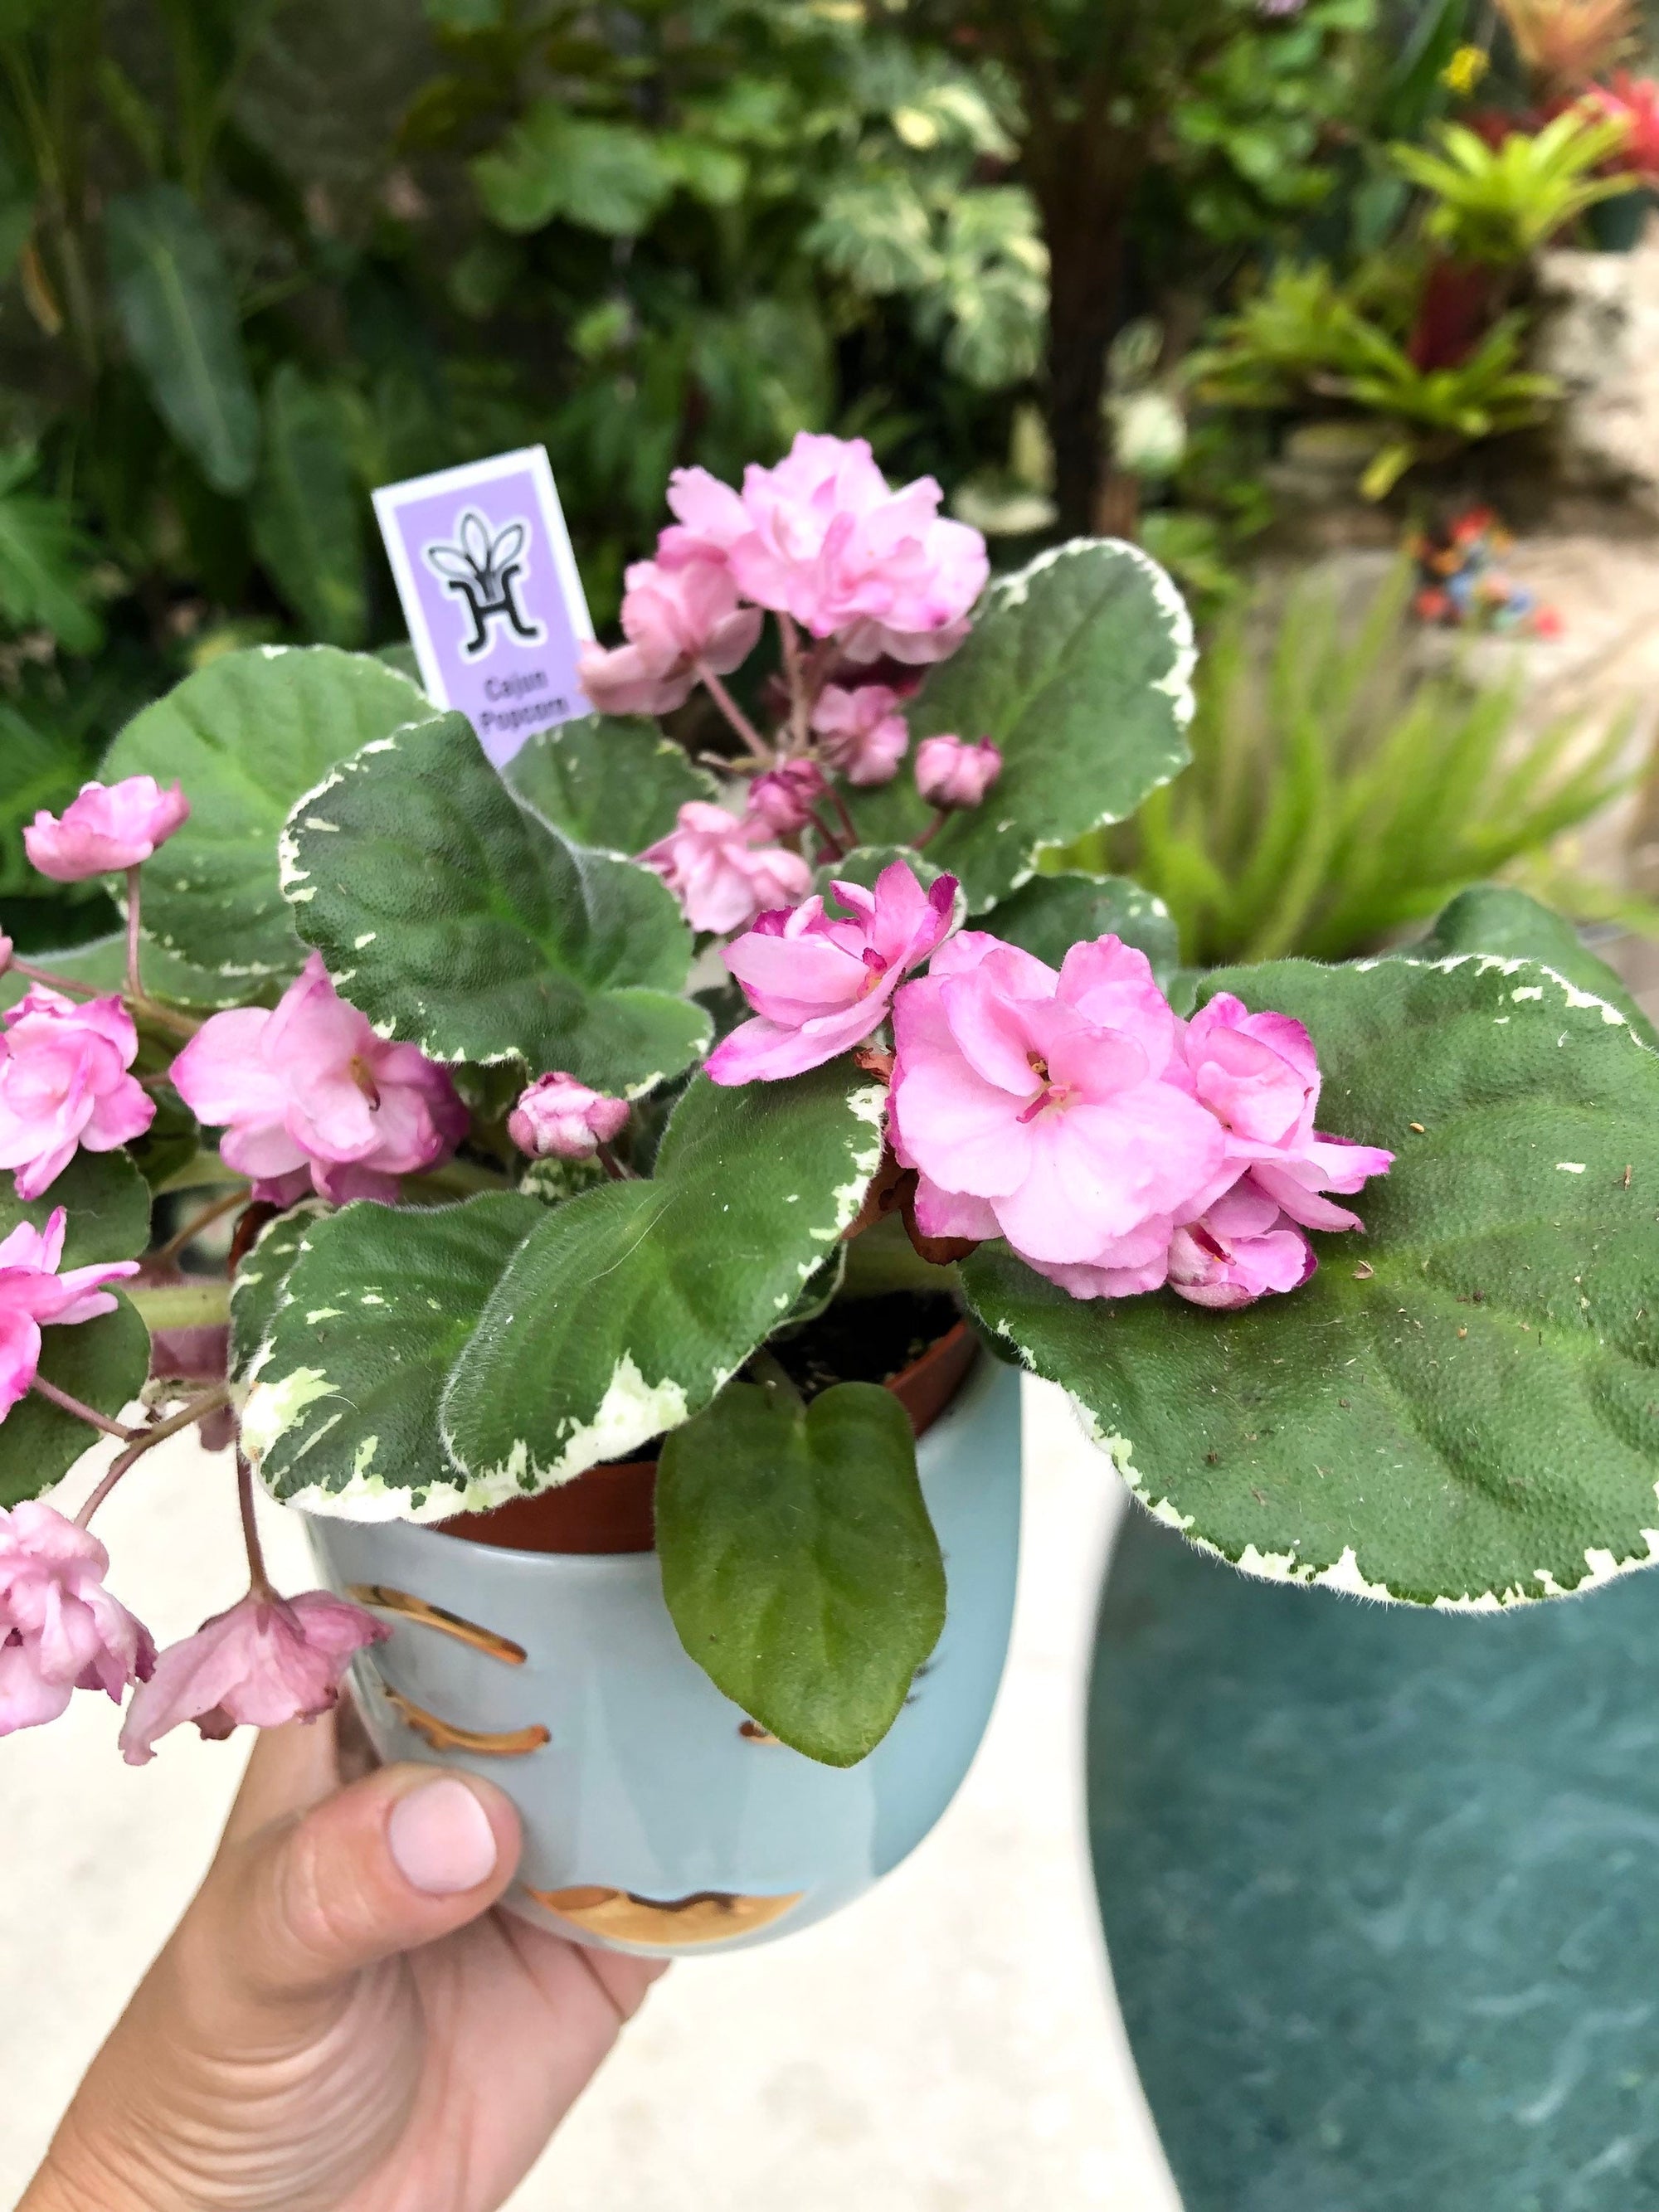 Live house plant variegated African Violet Harmony’s ‘Cajun Popcorn’ pixie garden 4” flower Potted gift